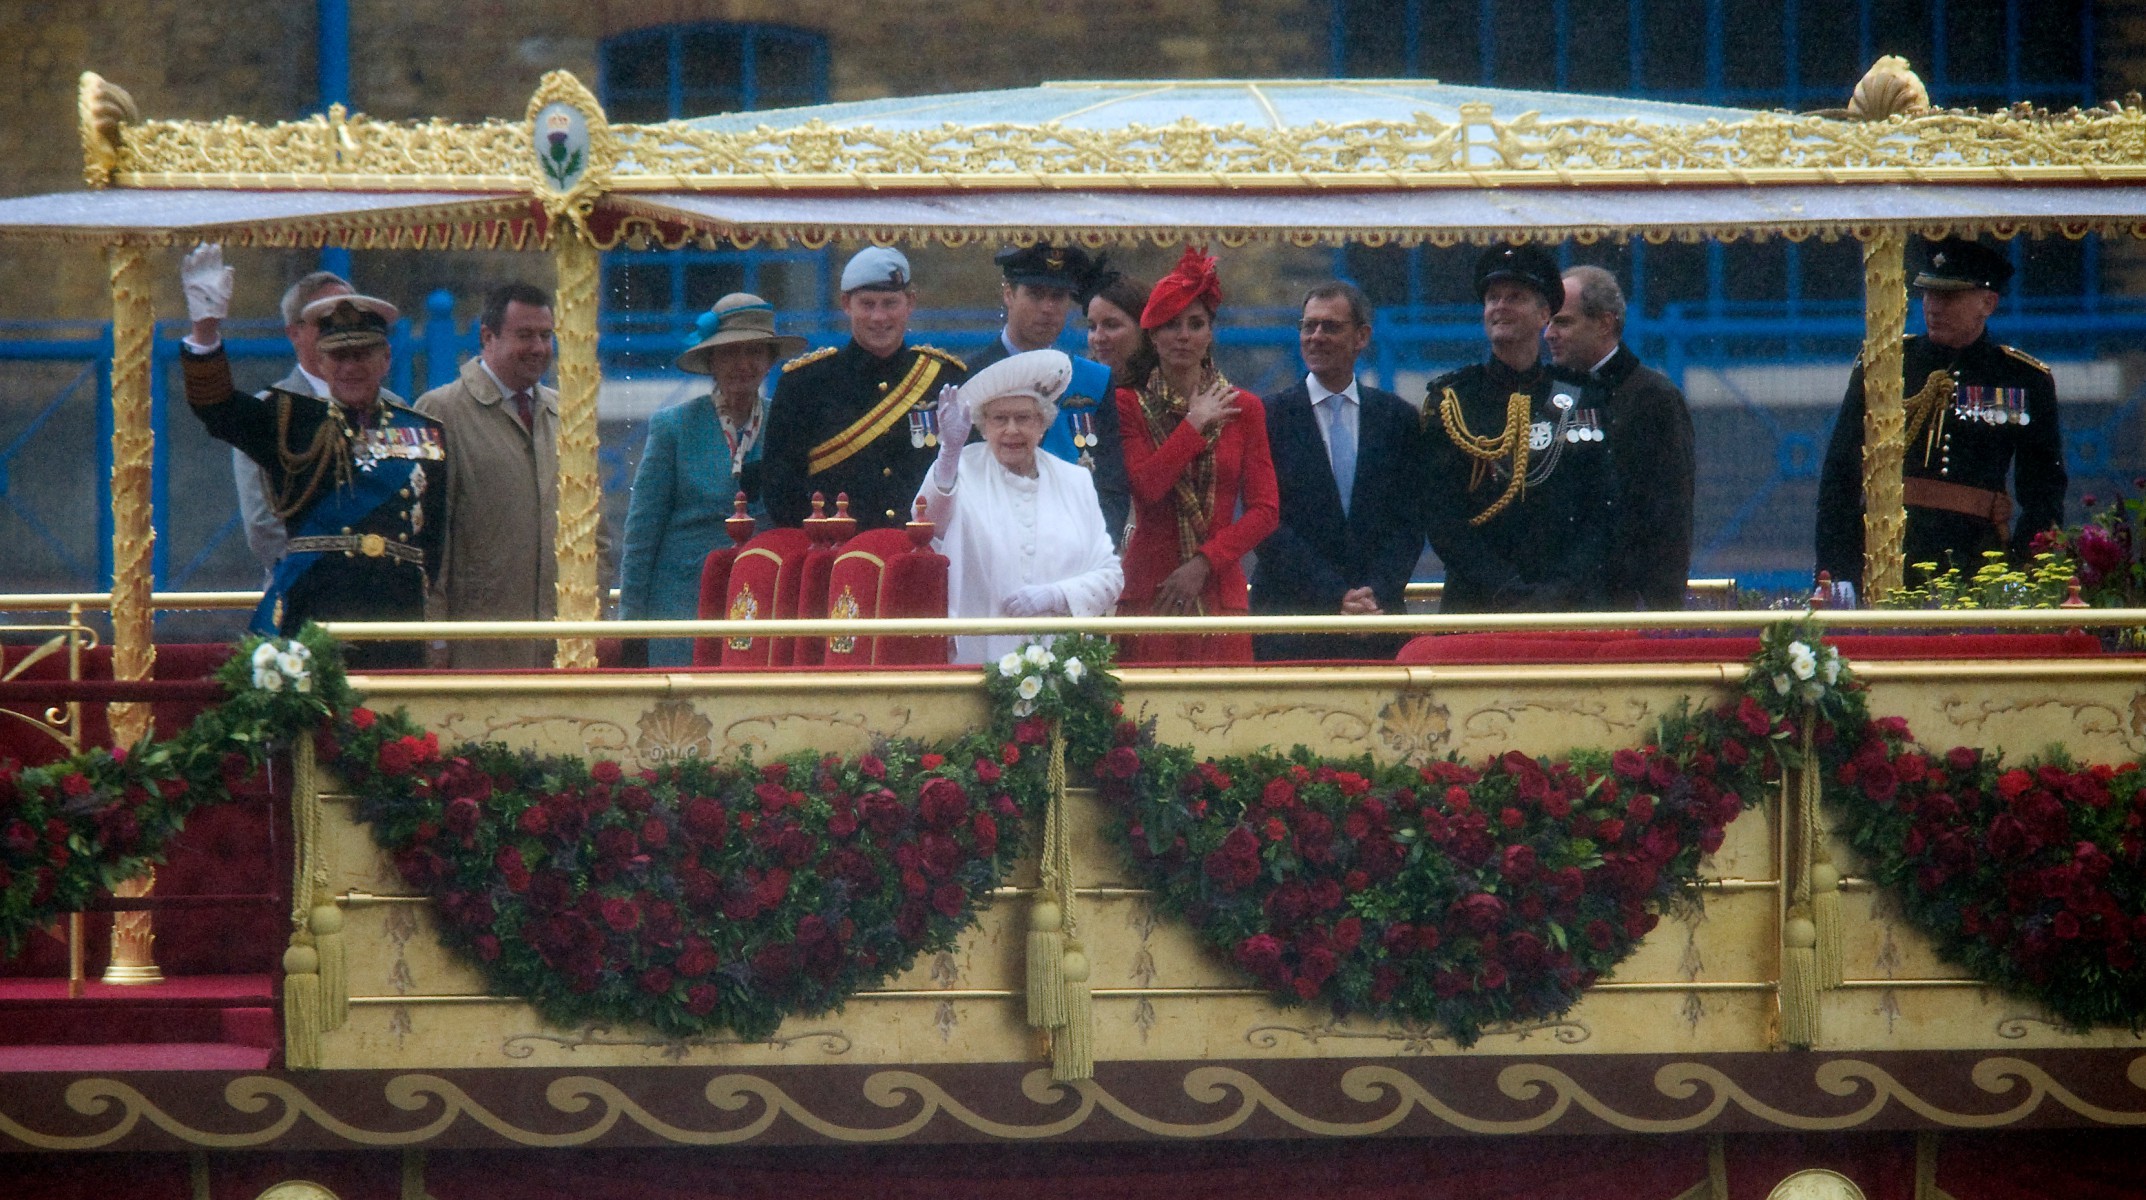 The Queen celebrated 60 years on the throne at her Diamond Jubilee